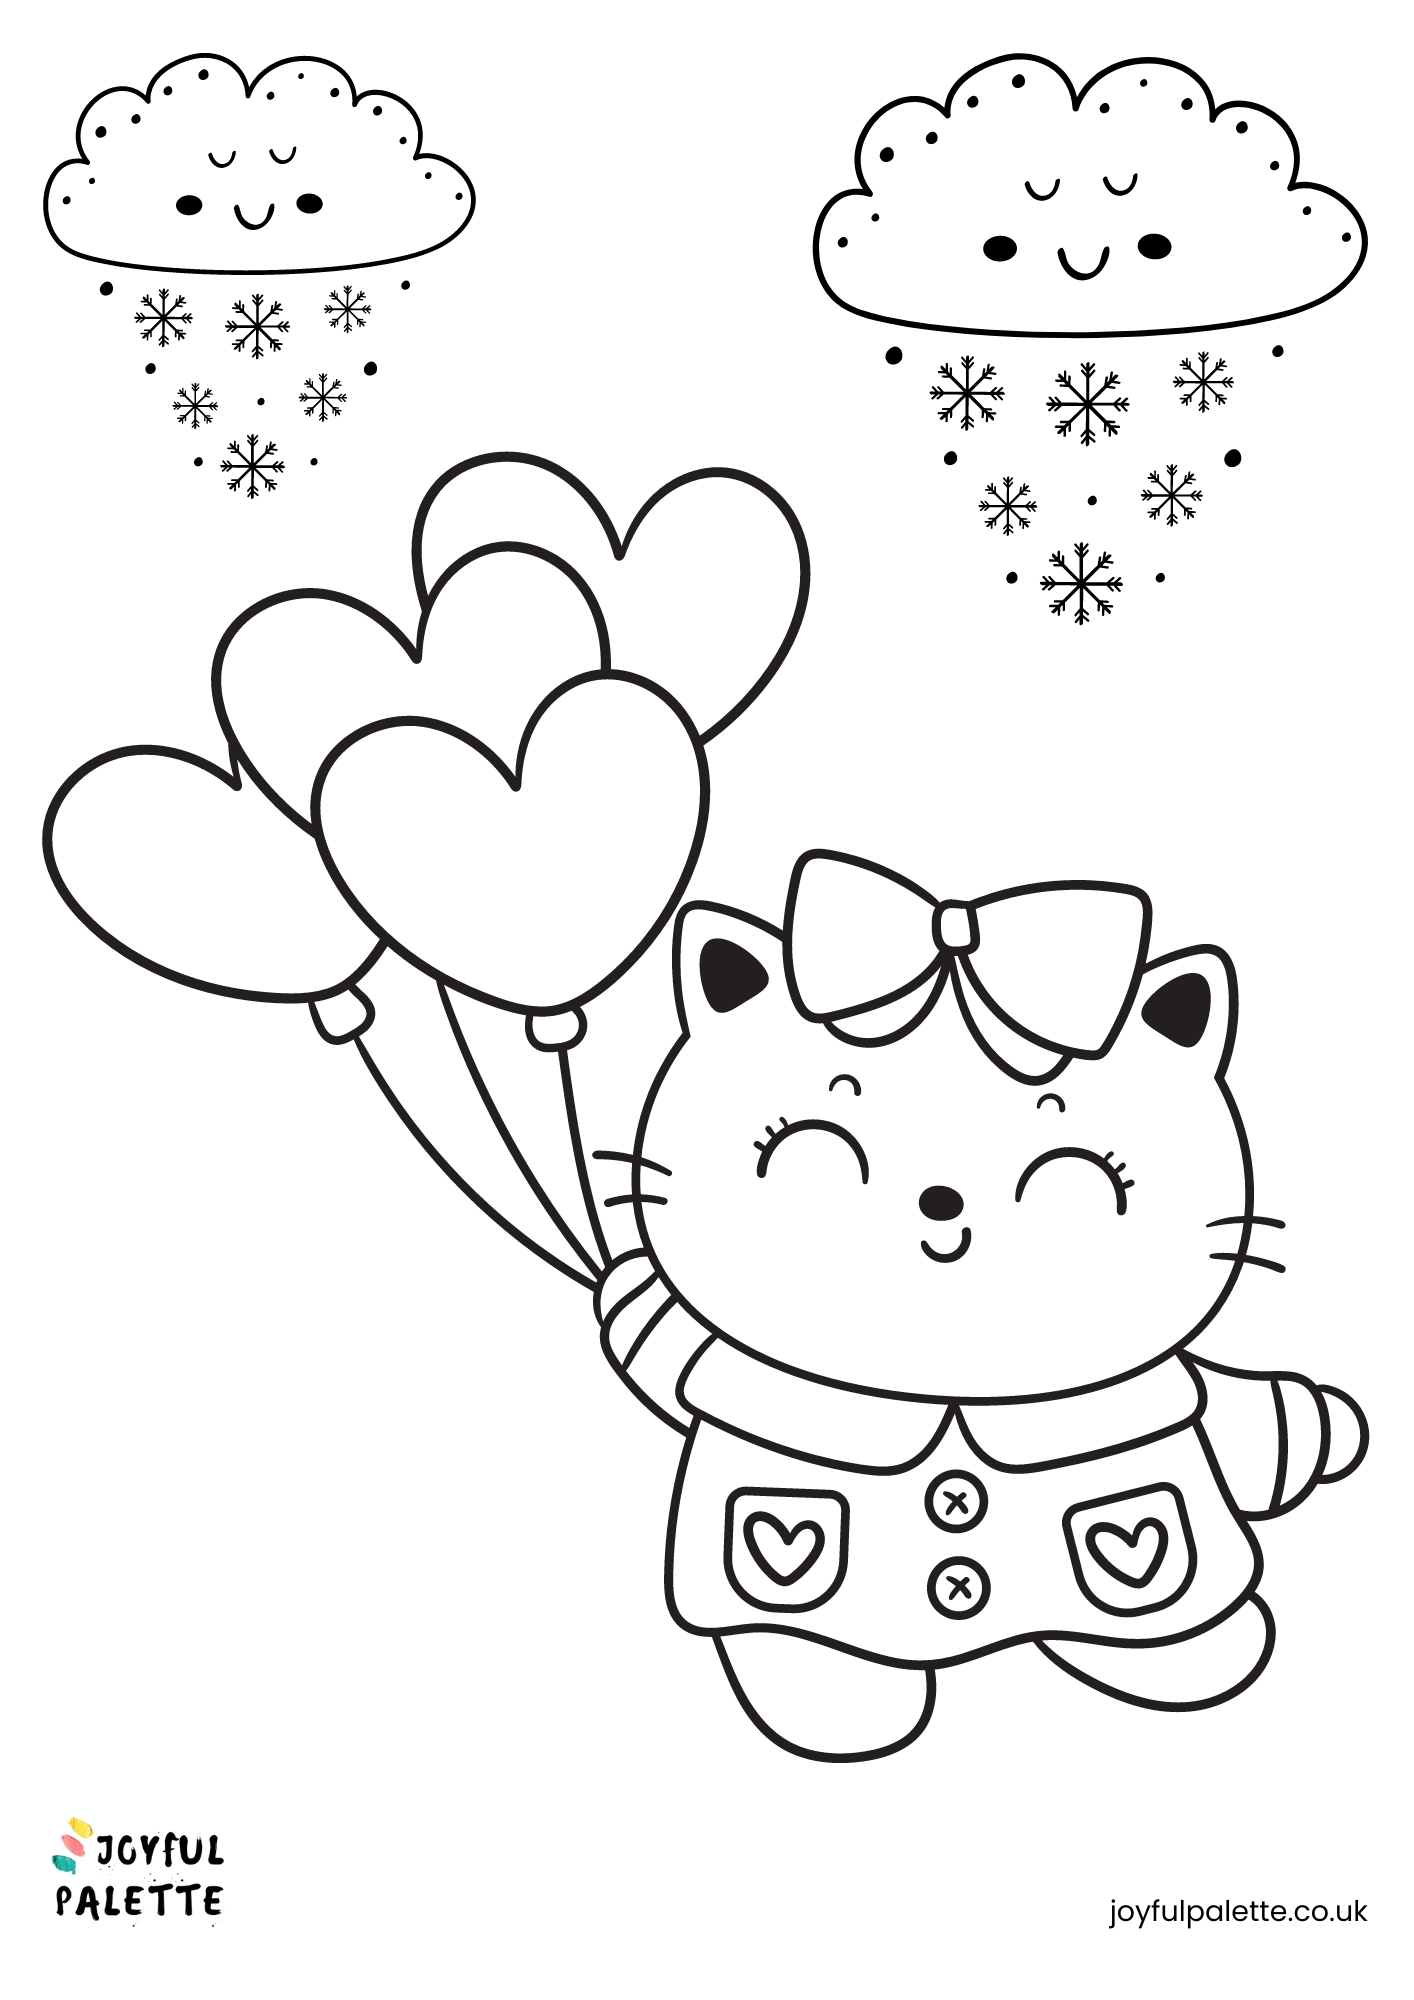 super cute coloring page